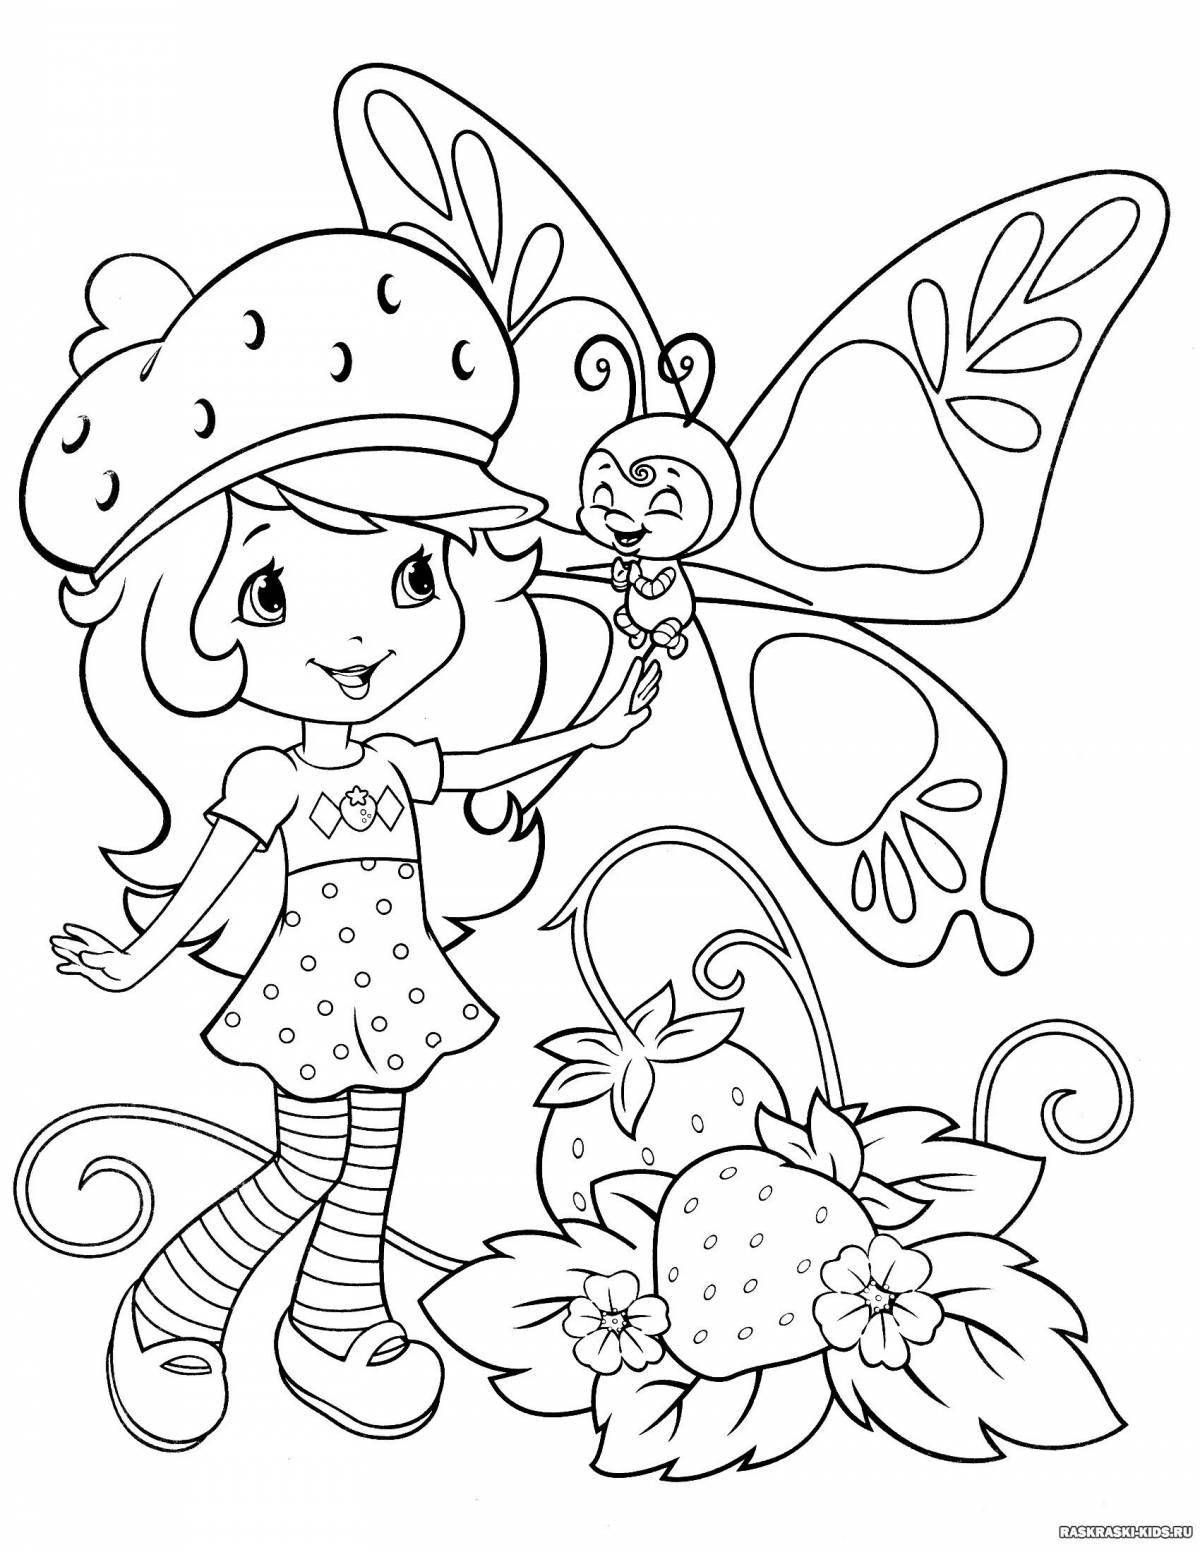 Dazzling coloring book for 3 year old girls